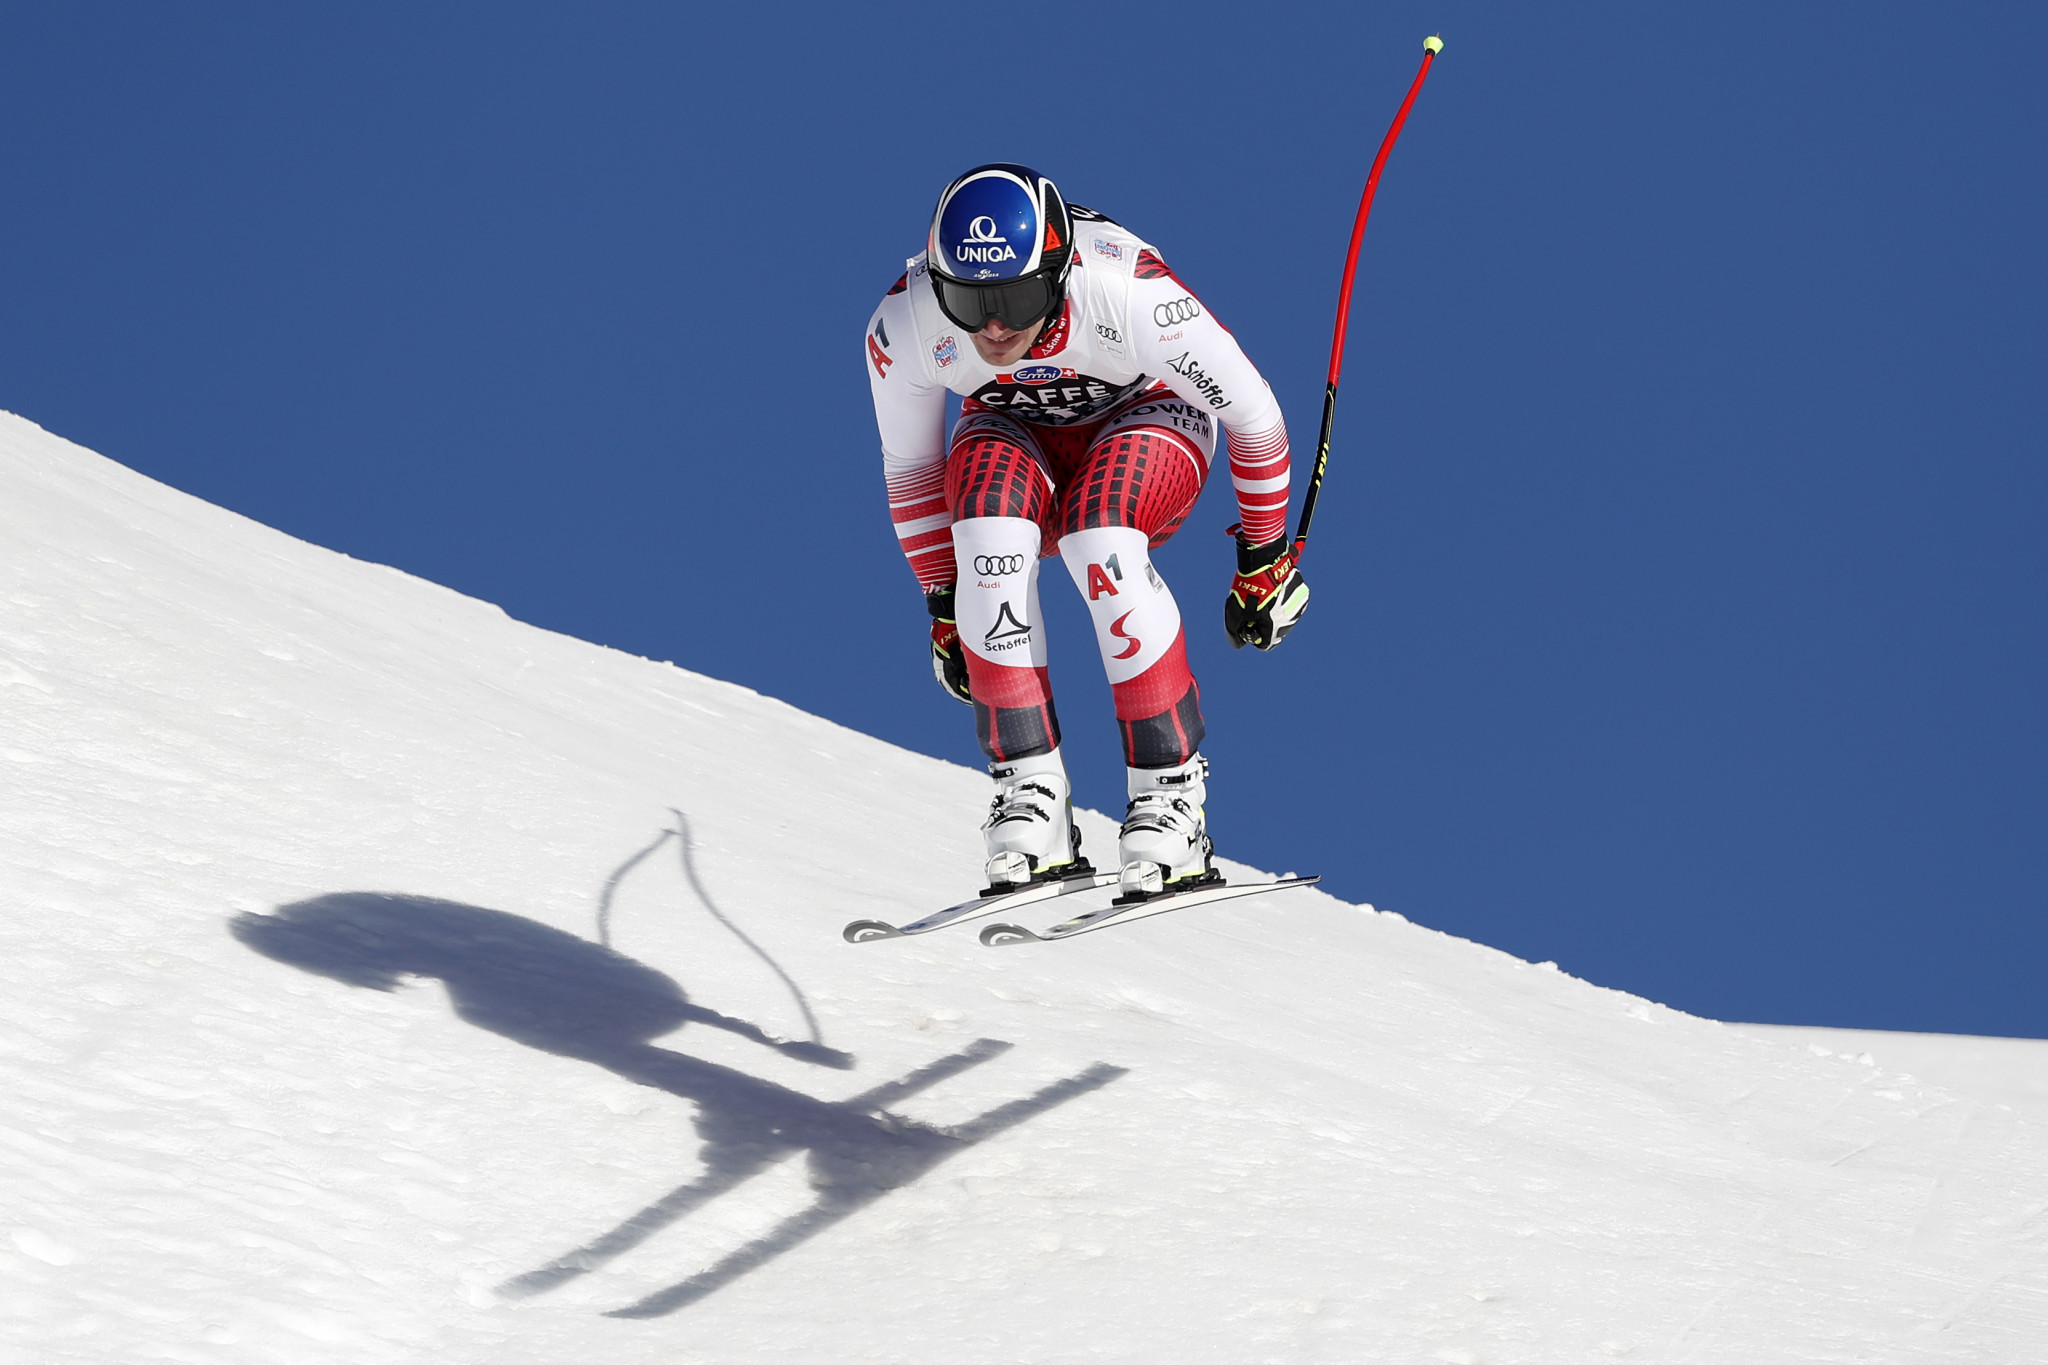 Mayer in-form for FIS Alpine Ski World Cup event in Wengen